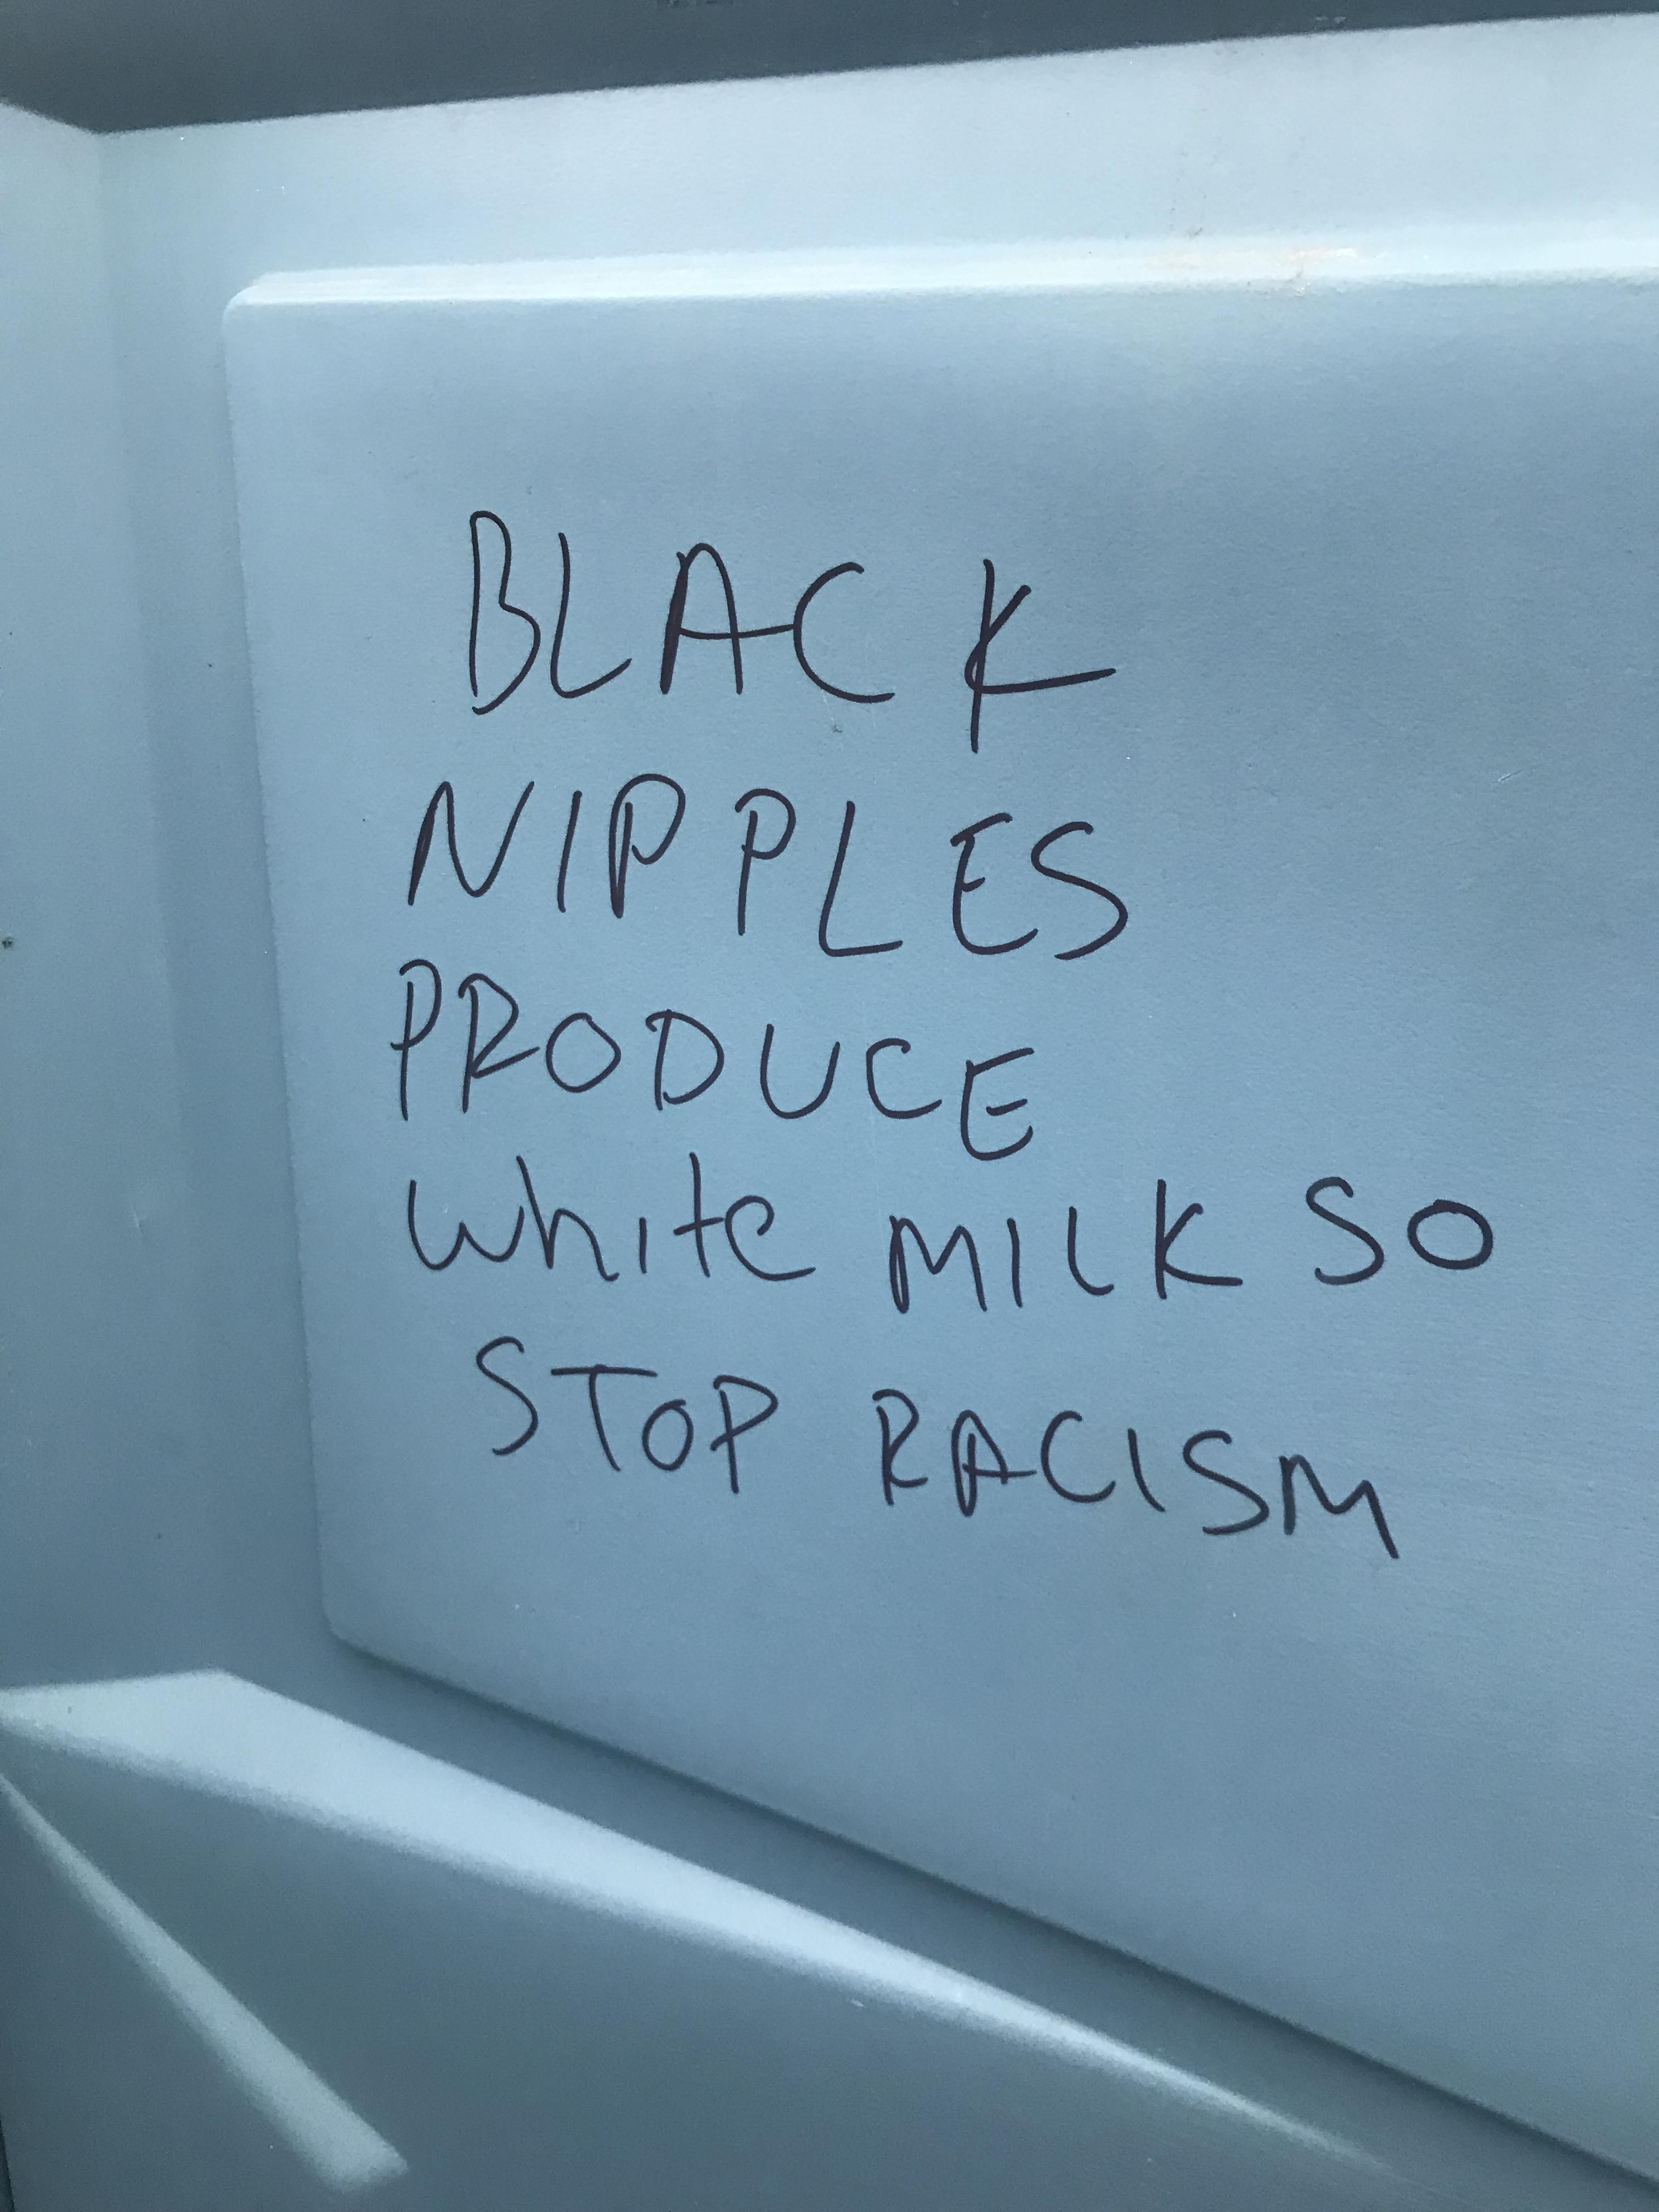 First Draft of Martin Luther King Jr’s “I Have A Dream” speech 1963